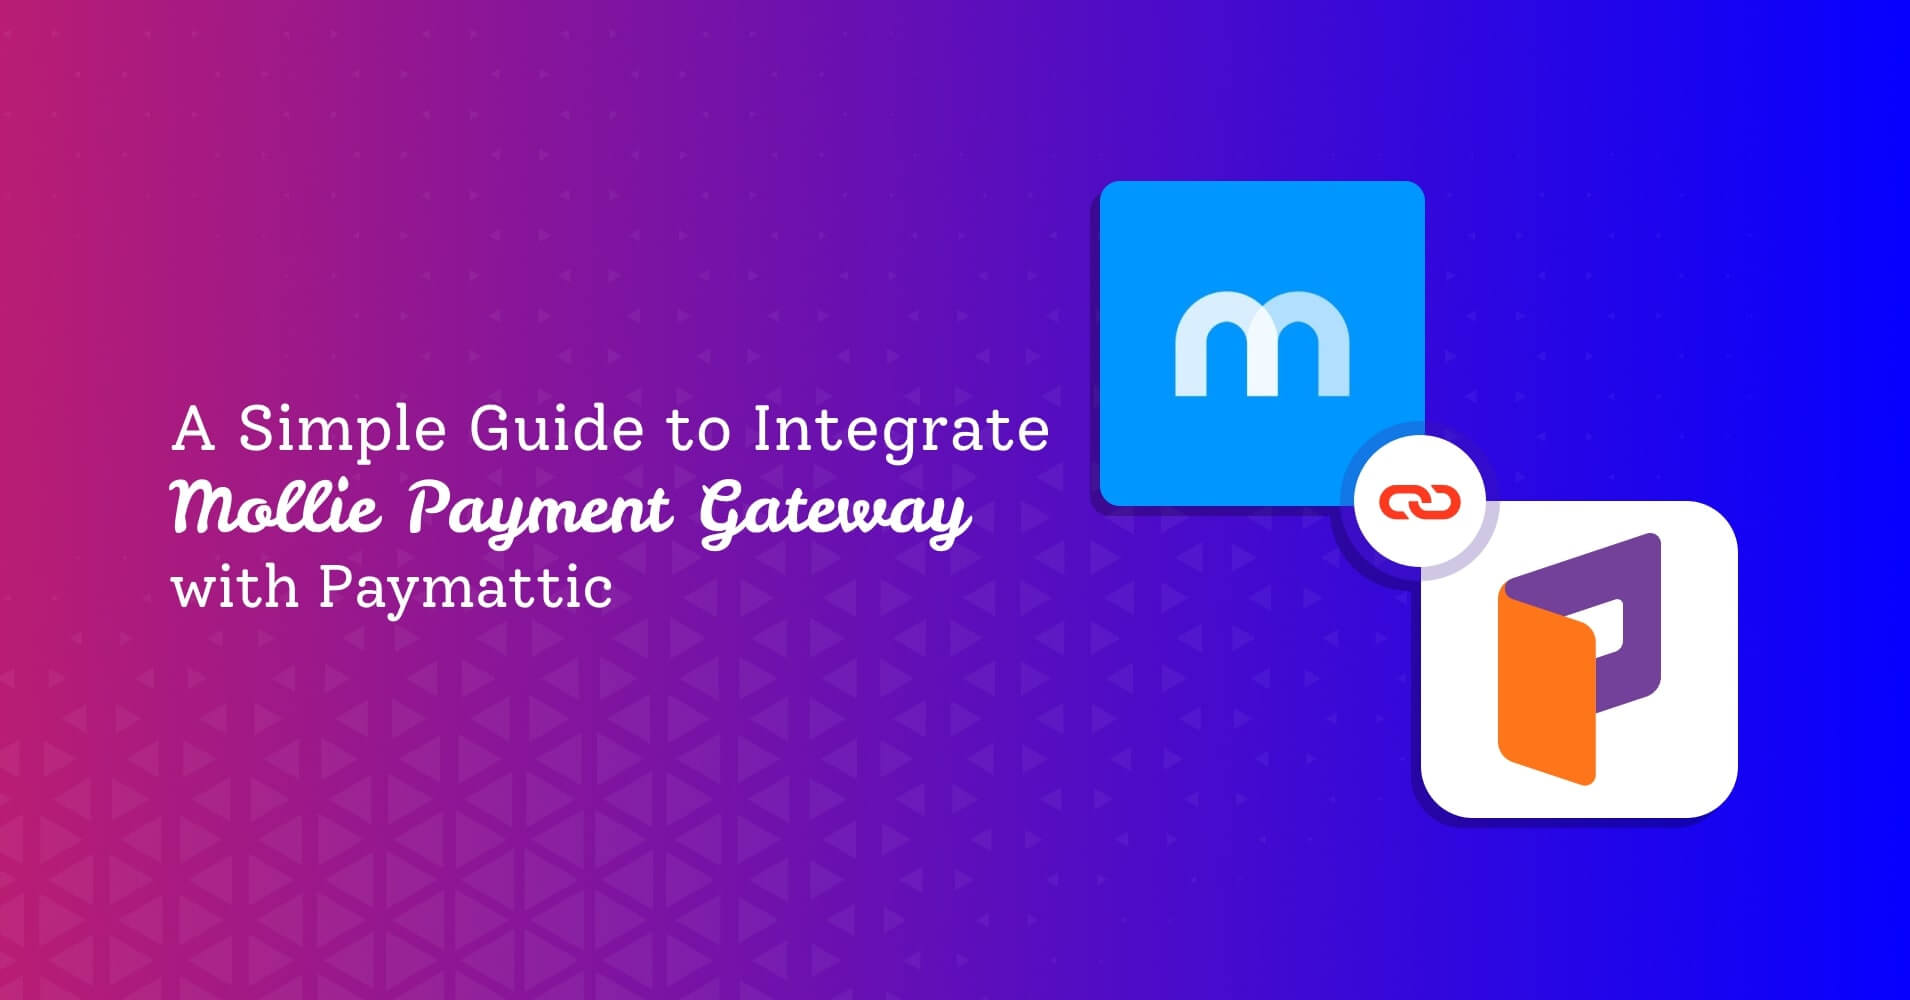 How to Integrate Mollie Payment Gateway with Paymattic?